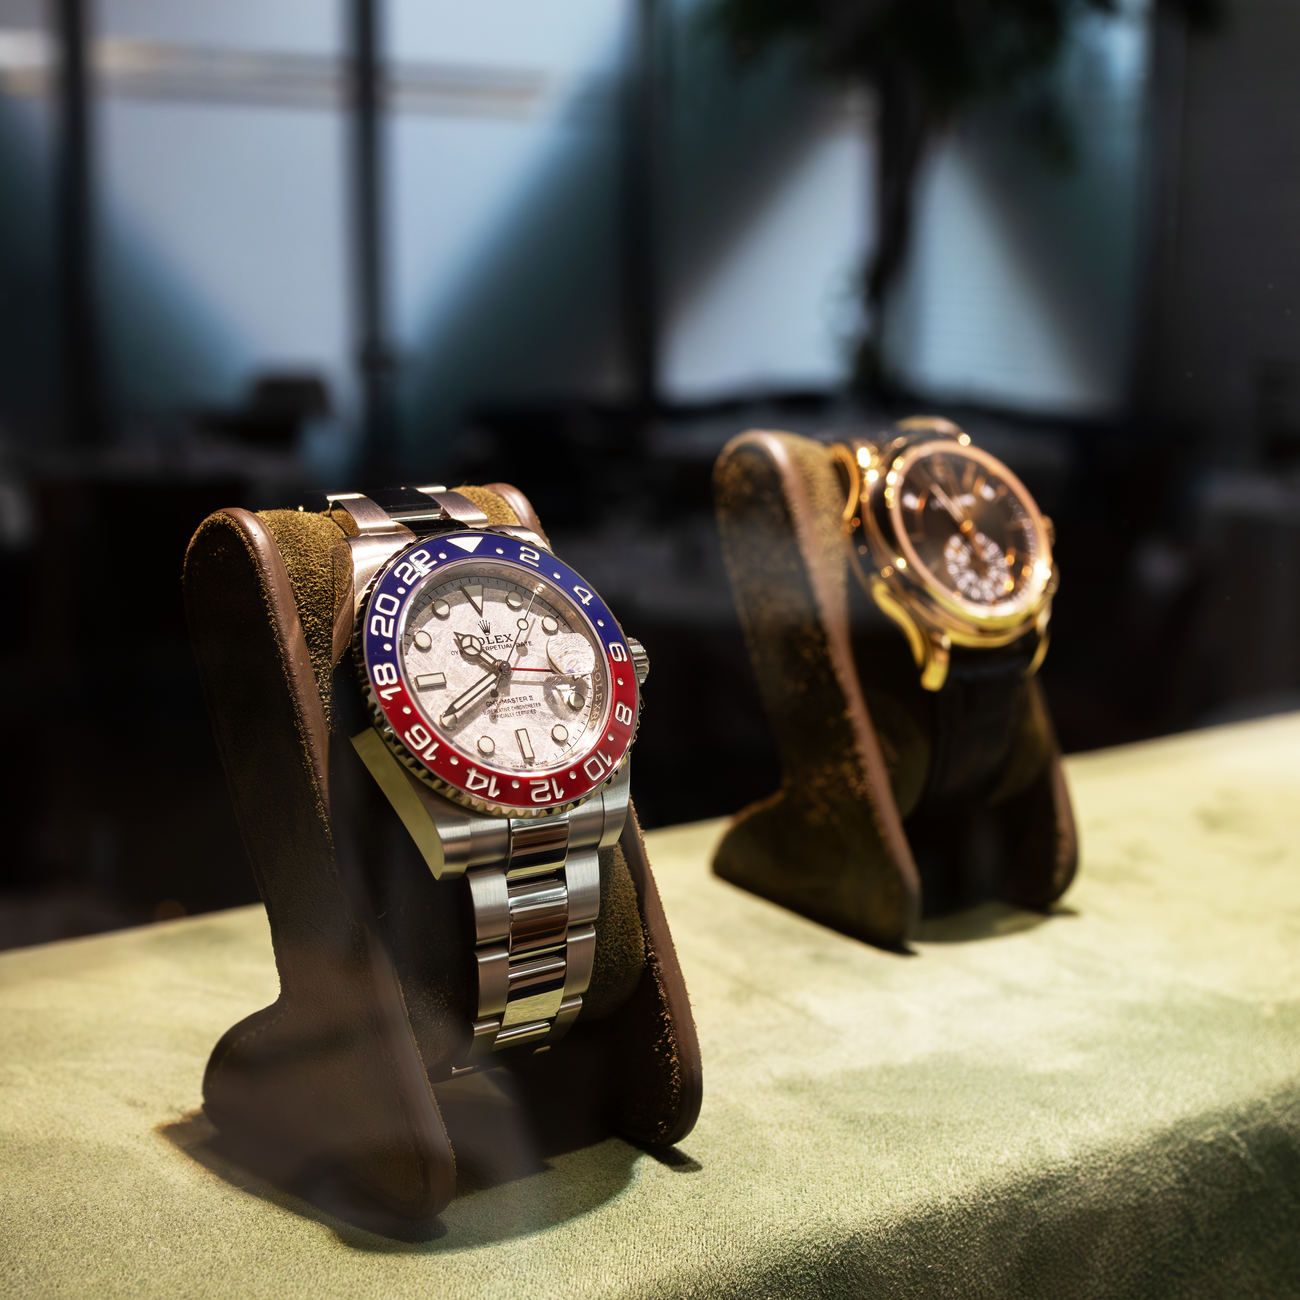 Watches exhibited sample